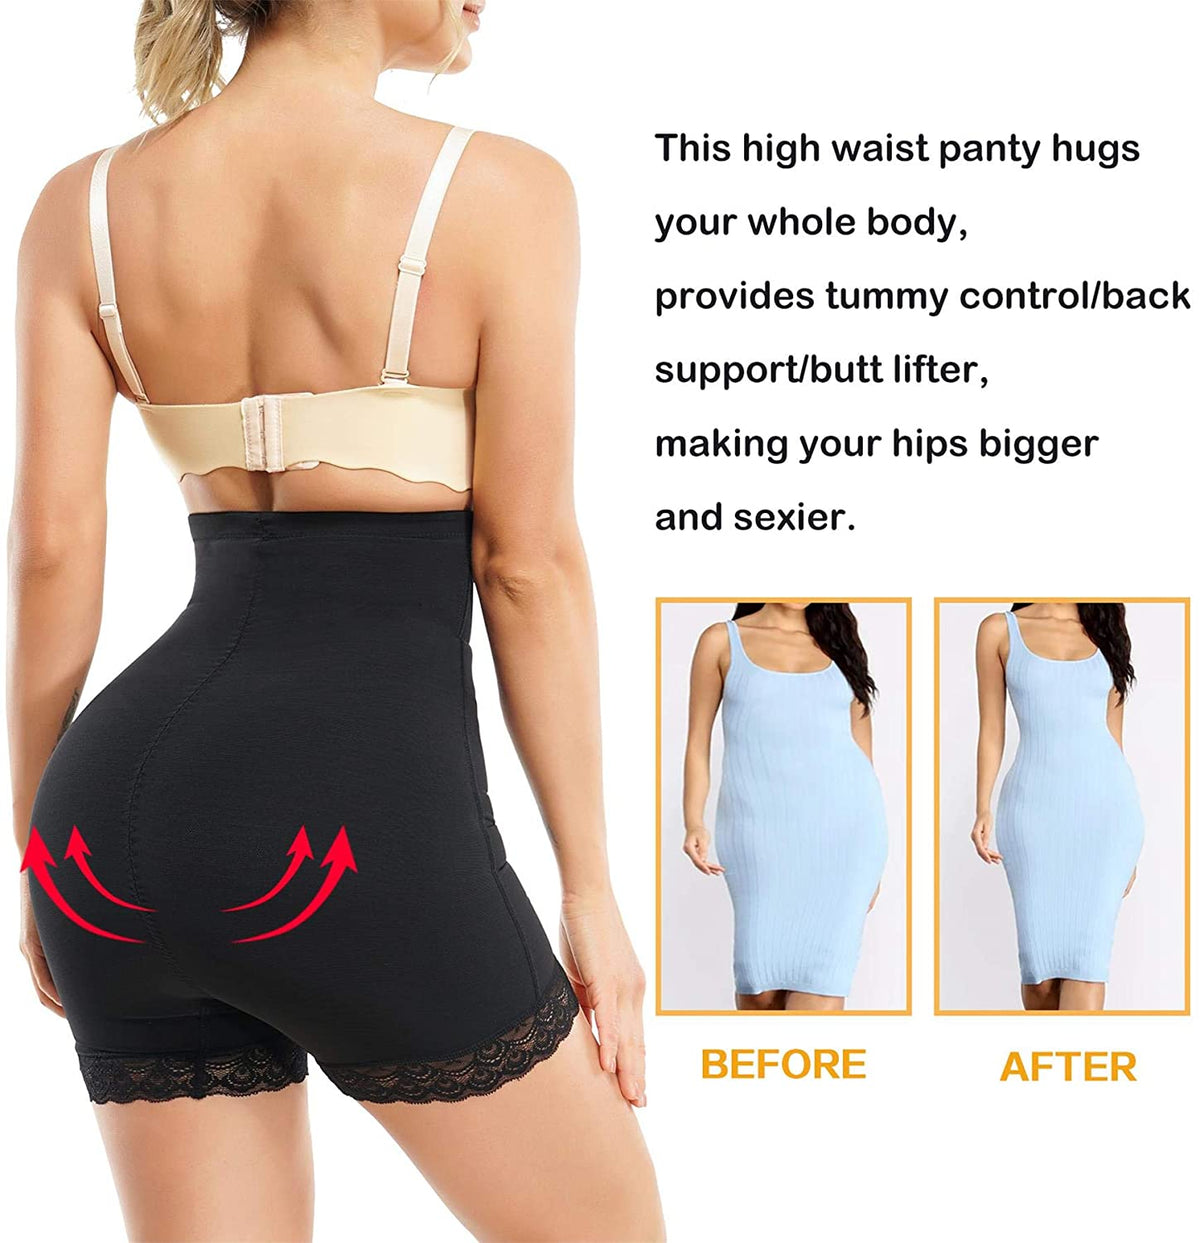 Women High Waist Adjustable Cincher Butt Lifter With Lace Edge Before And After - Nebility